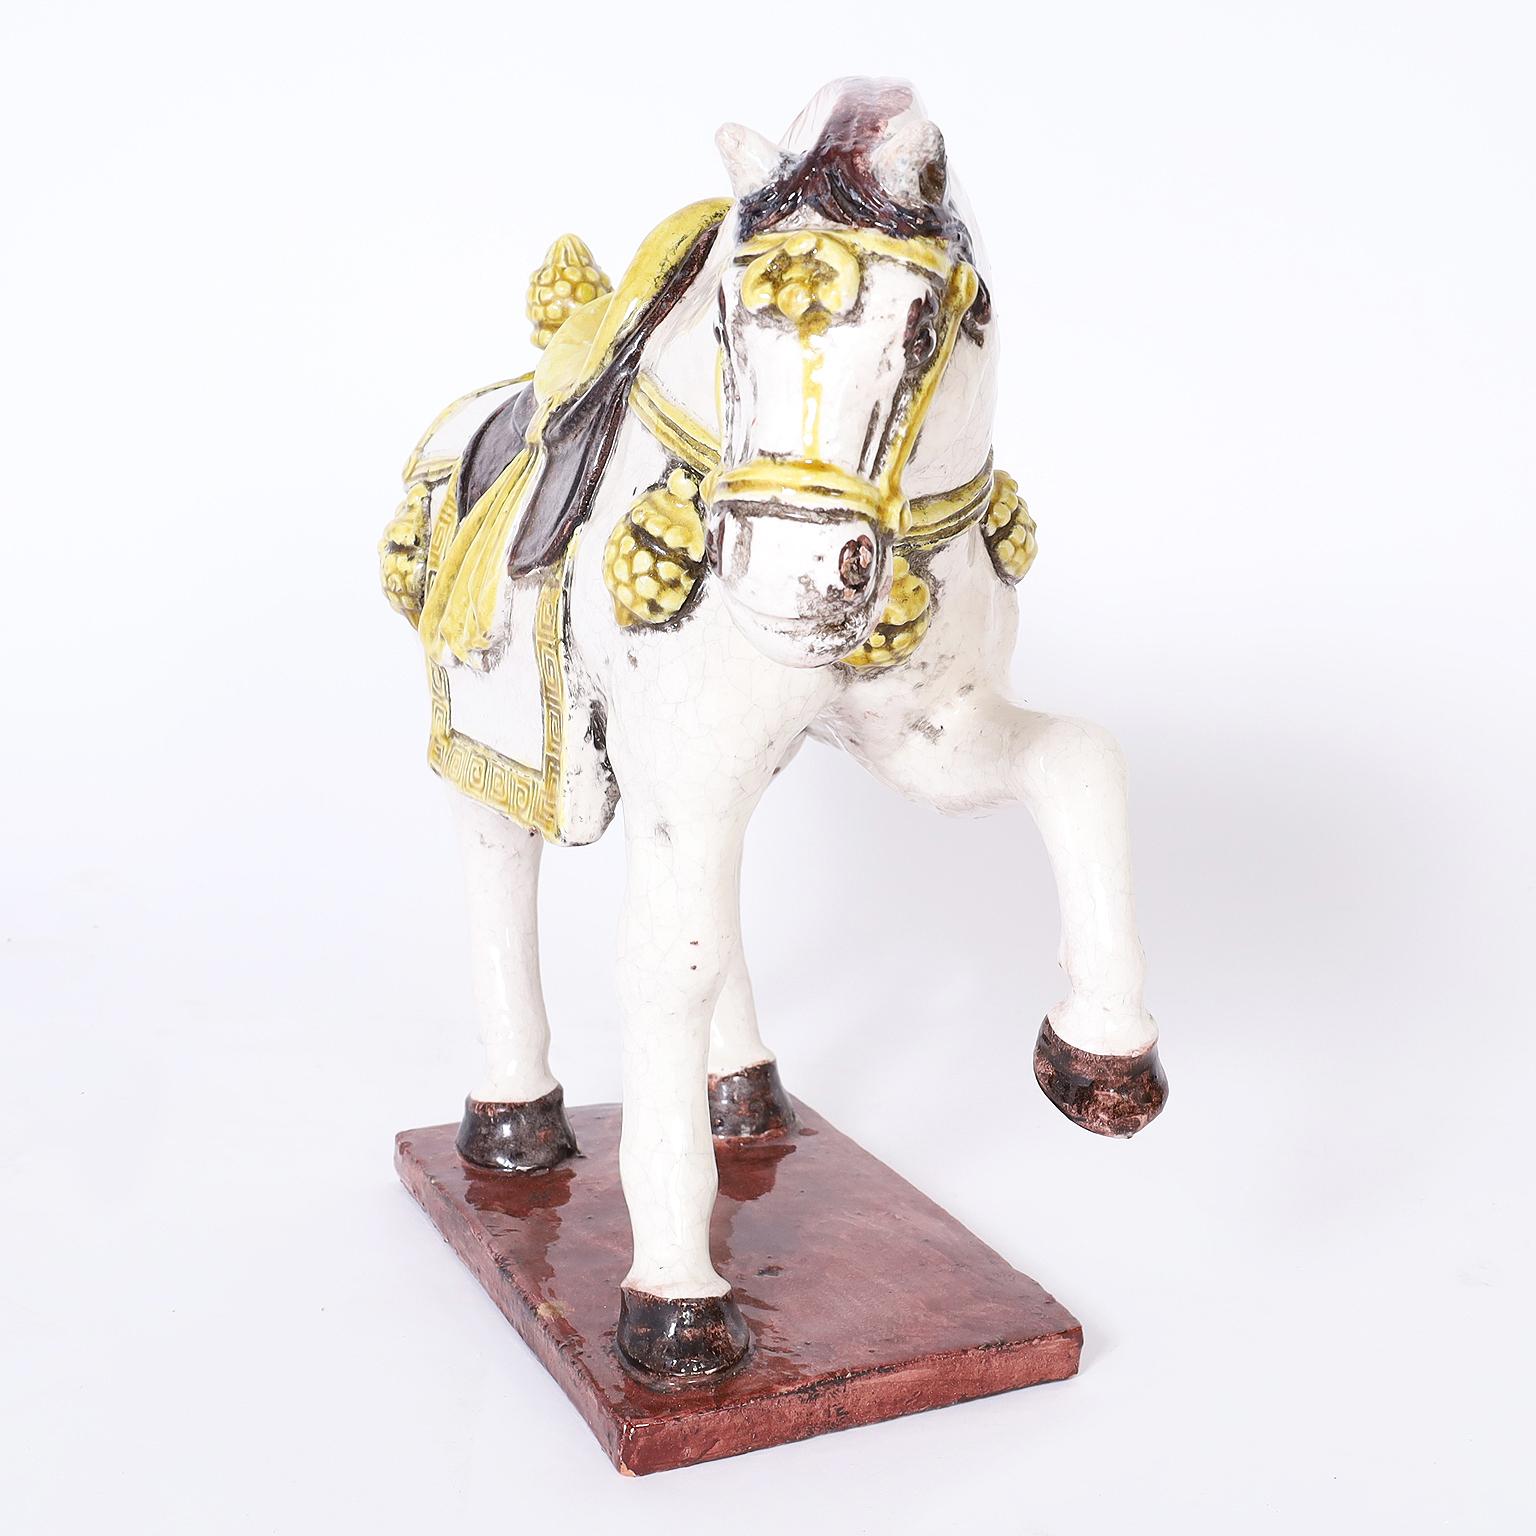 Terra cotta horse sculpture or object of art decorated in holiday attire under glaze. Signed made in Italy on the bottom.